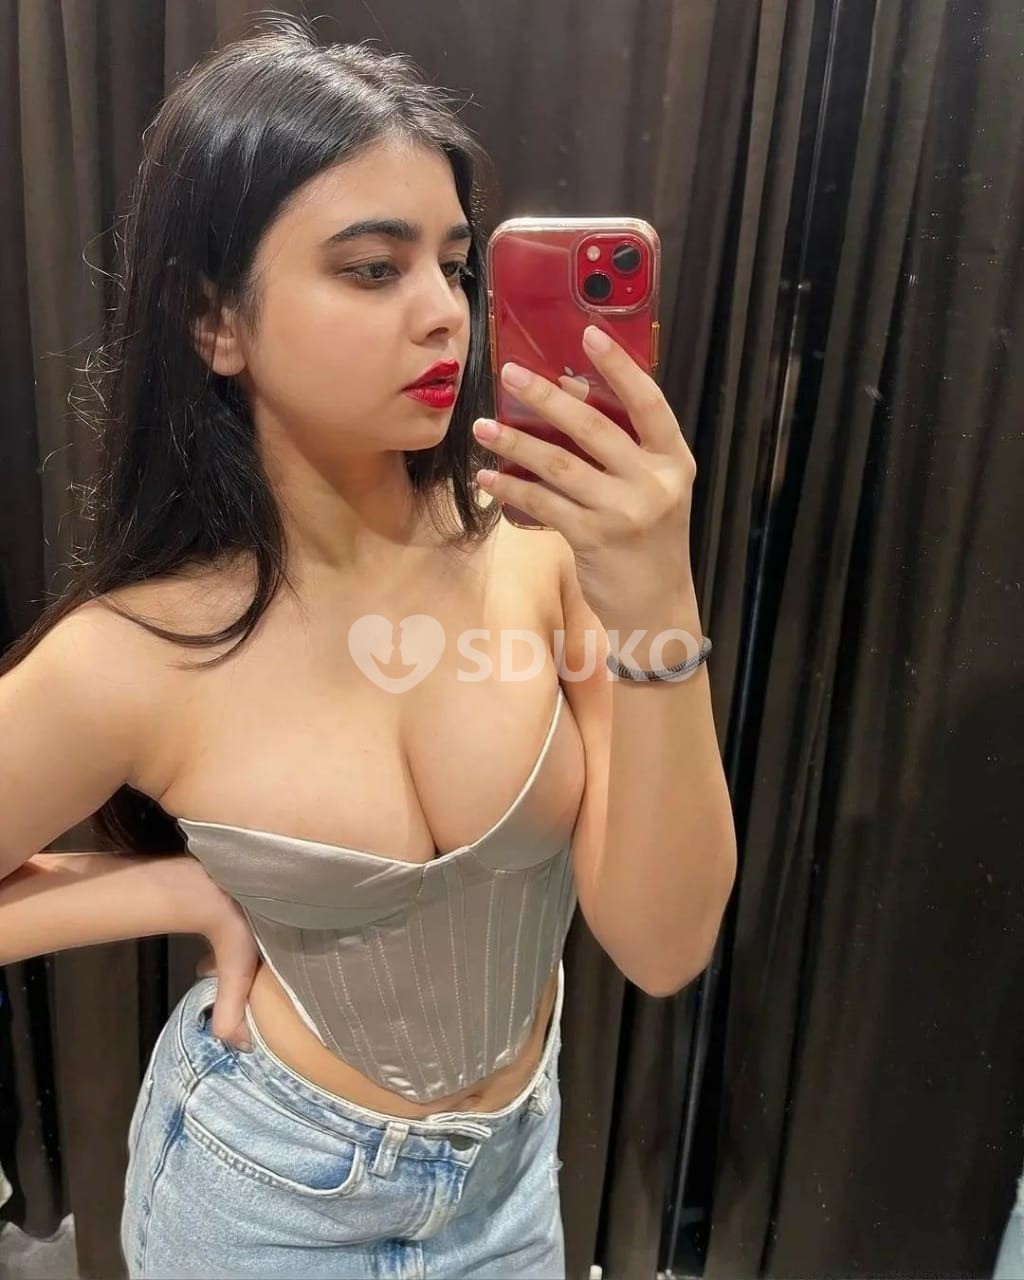 SALT LAKE  KOLKATA (/VIP TODAY LOW PRICE ESCORT 🥰SERVICE 100% SAFE AND SECURE ANYTIME CALL ME 24 X 7 SERVICE AVAILABL